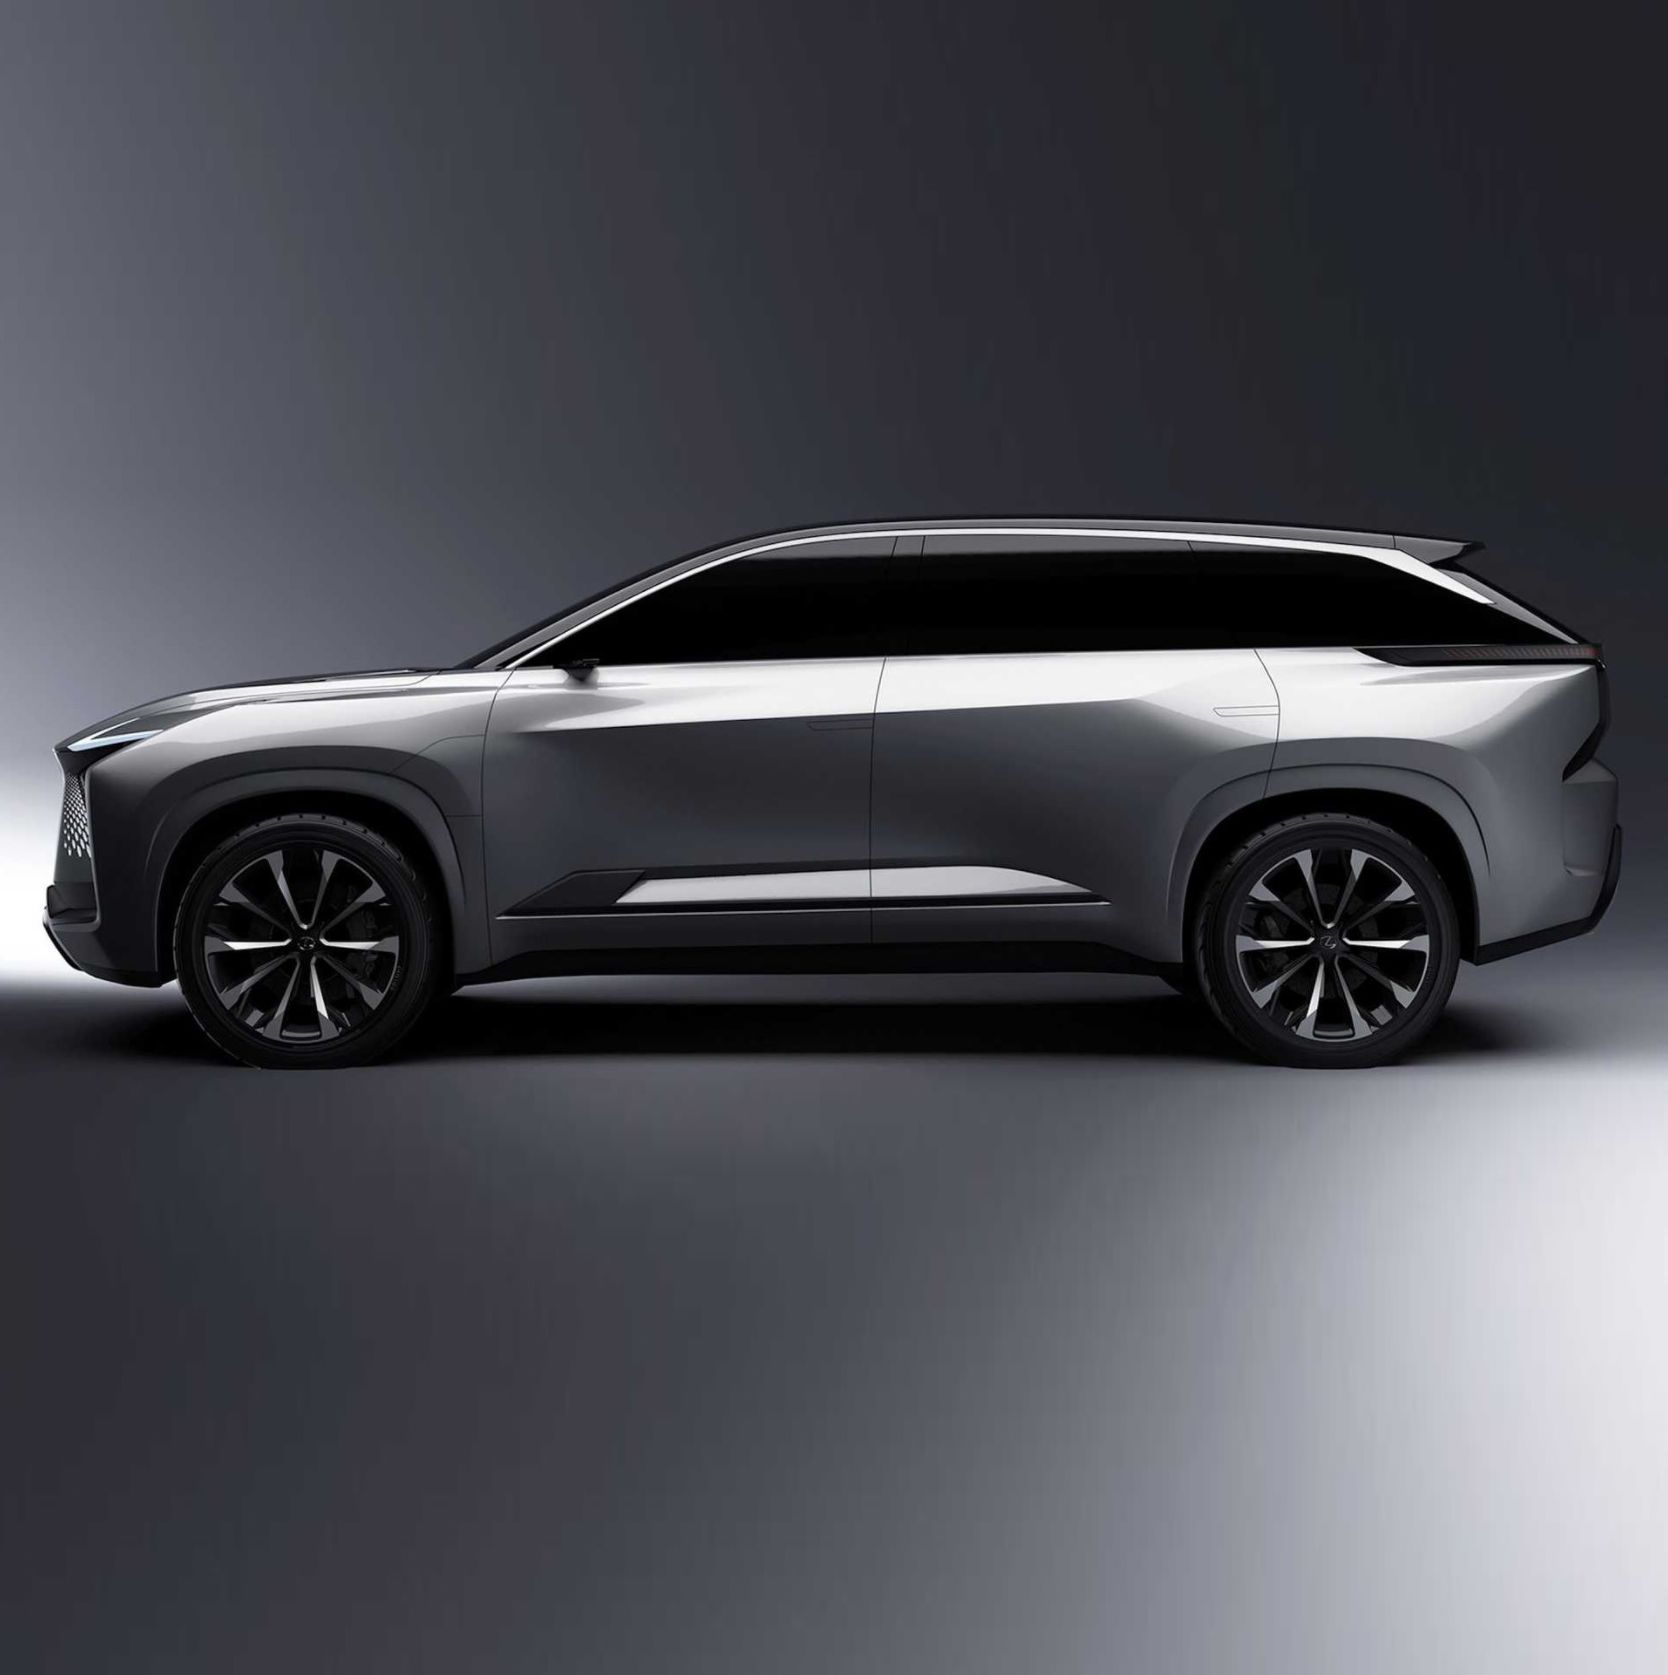 Lexus Gives a Better View of Electric SUV Concept